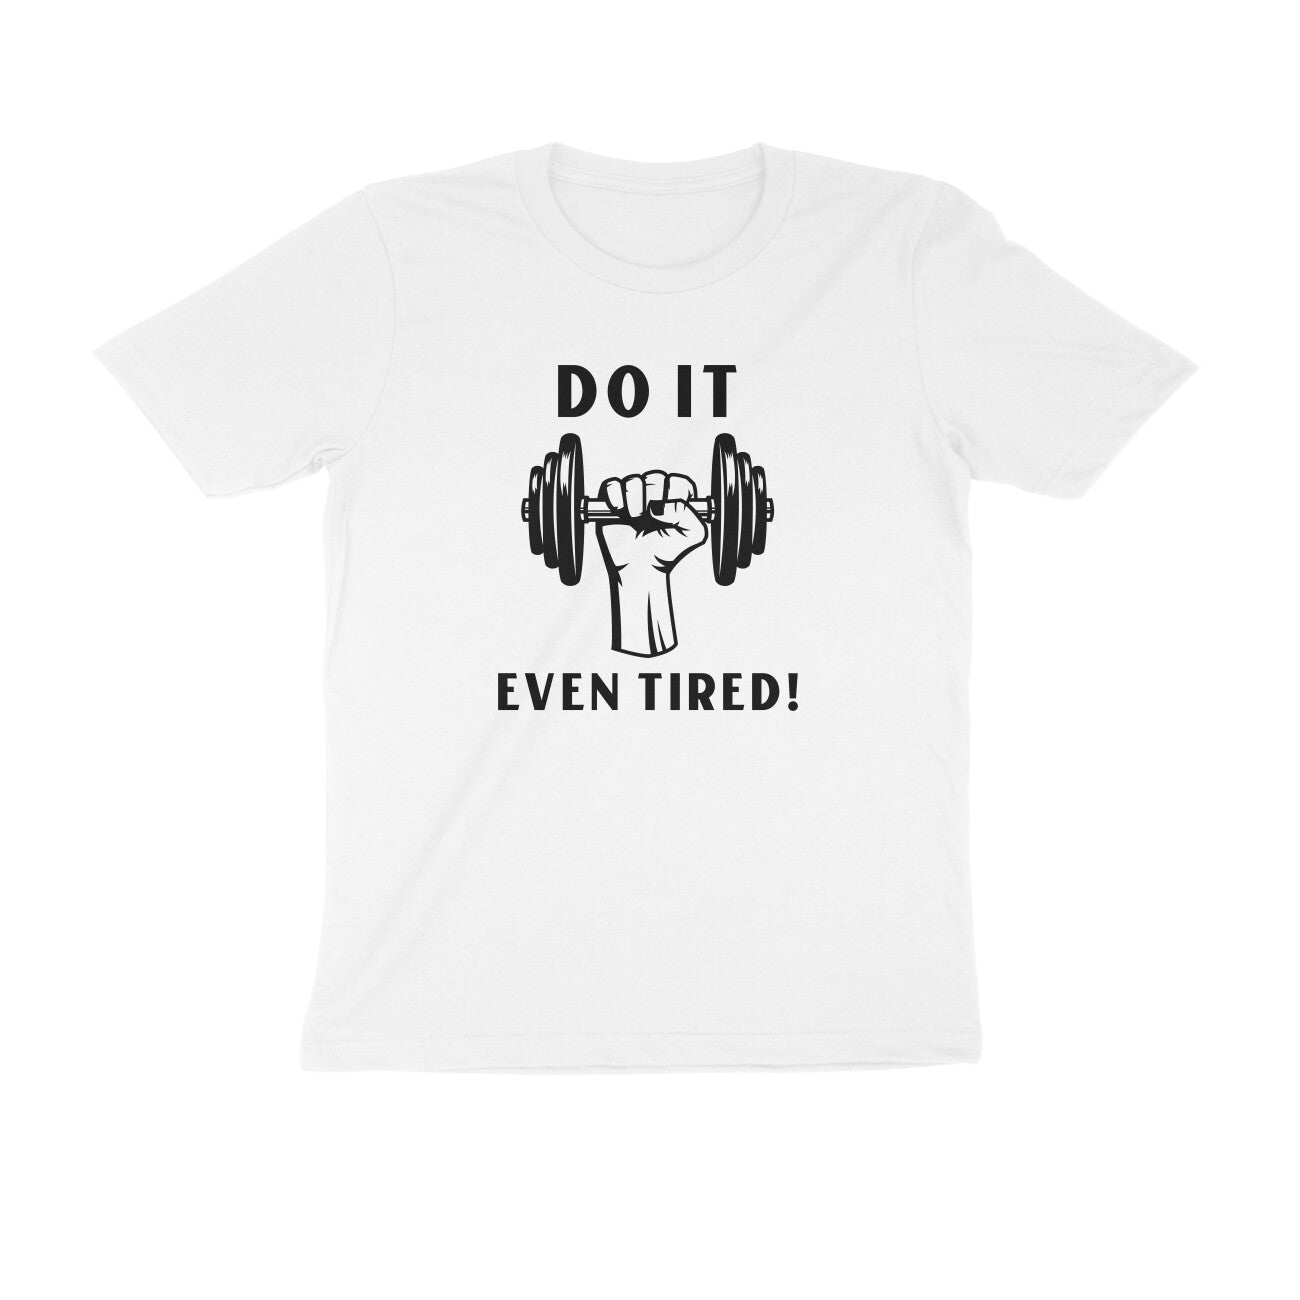 Do It Even Tired Men's Gym T-shirts